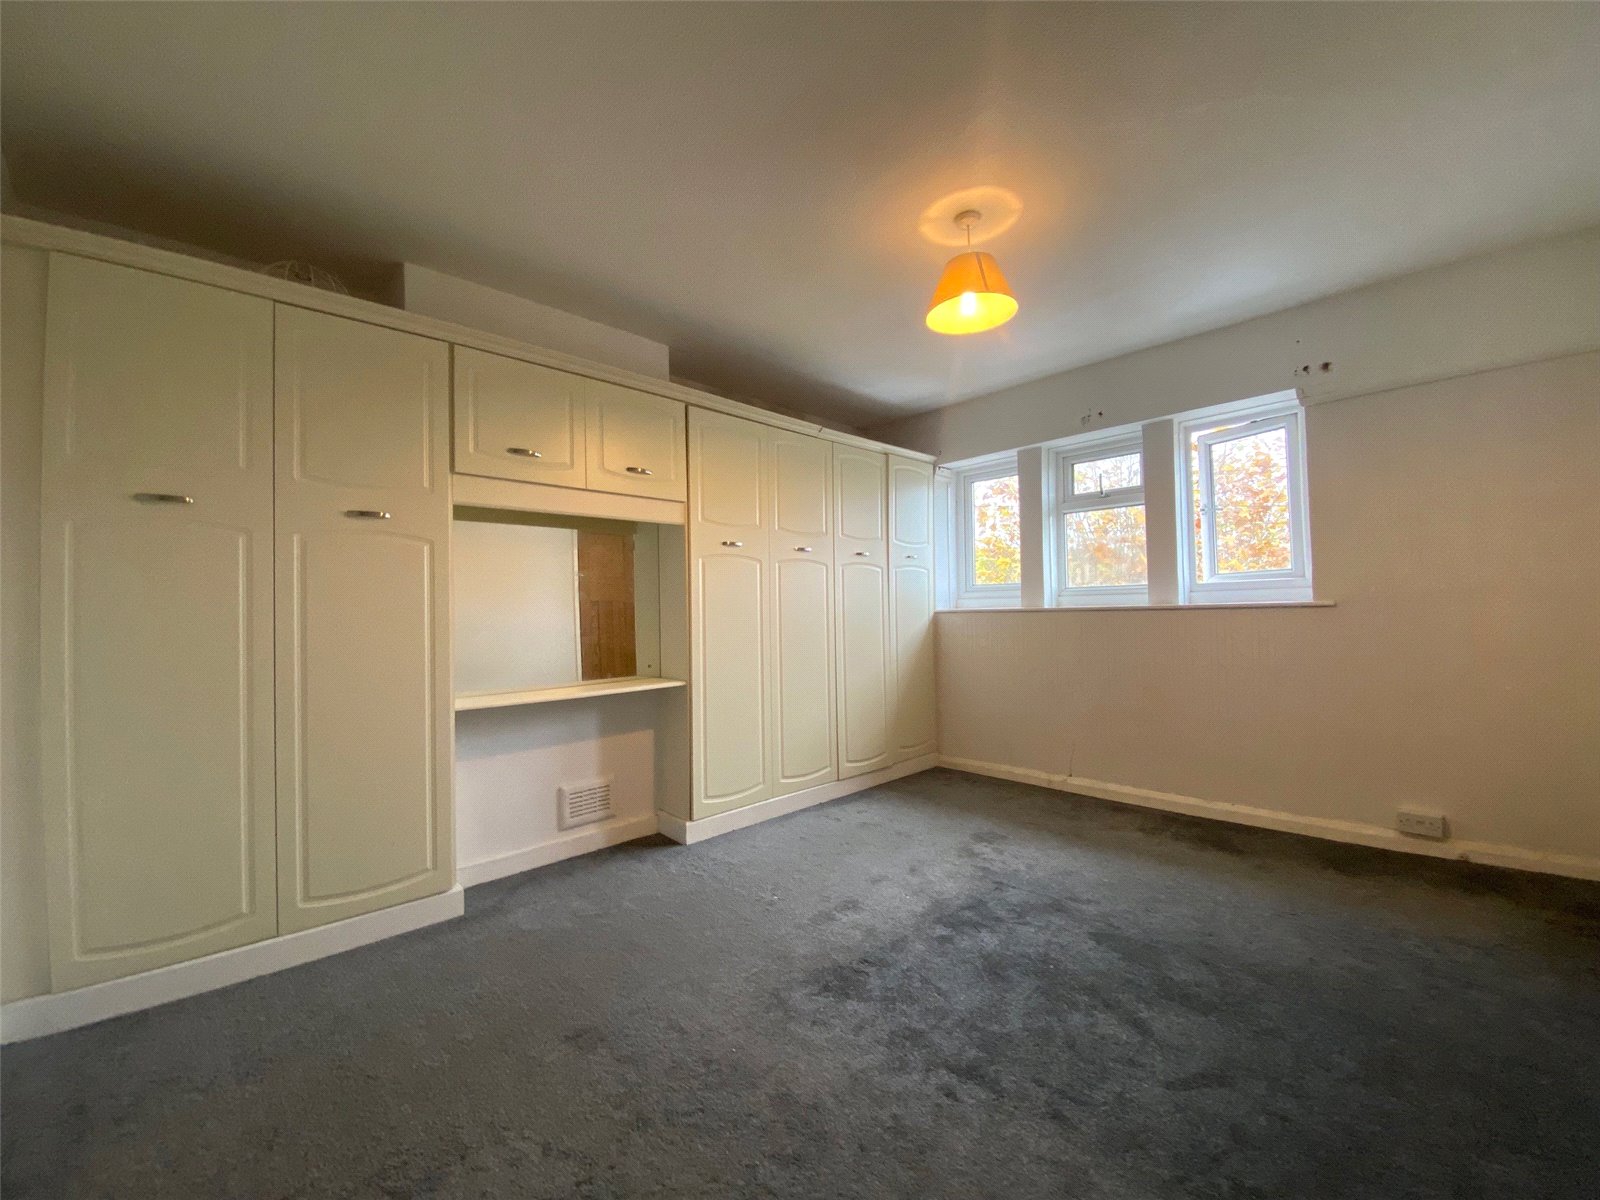 2 bed house for sale in Well Road, High Barnet  - Property Image 5